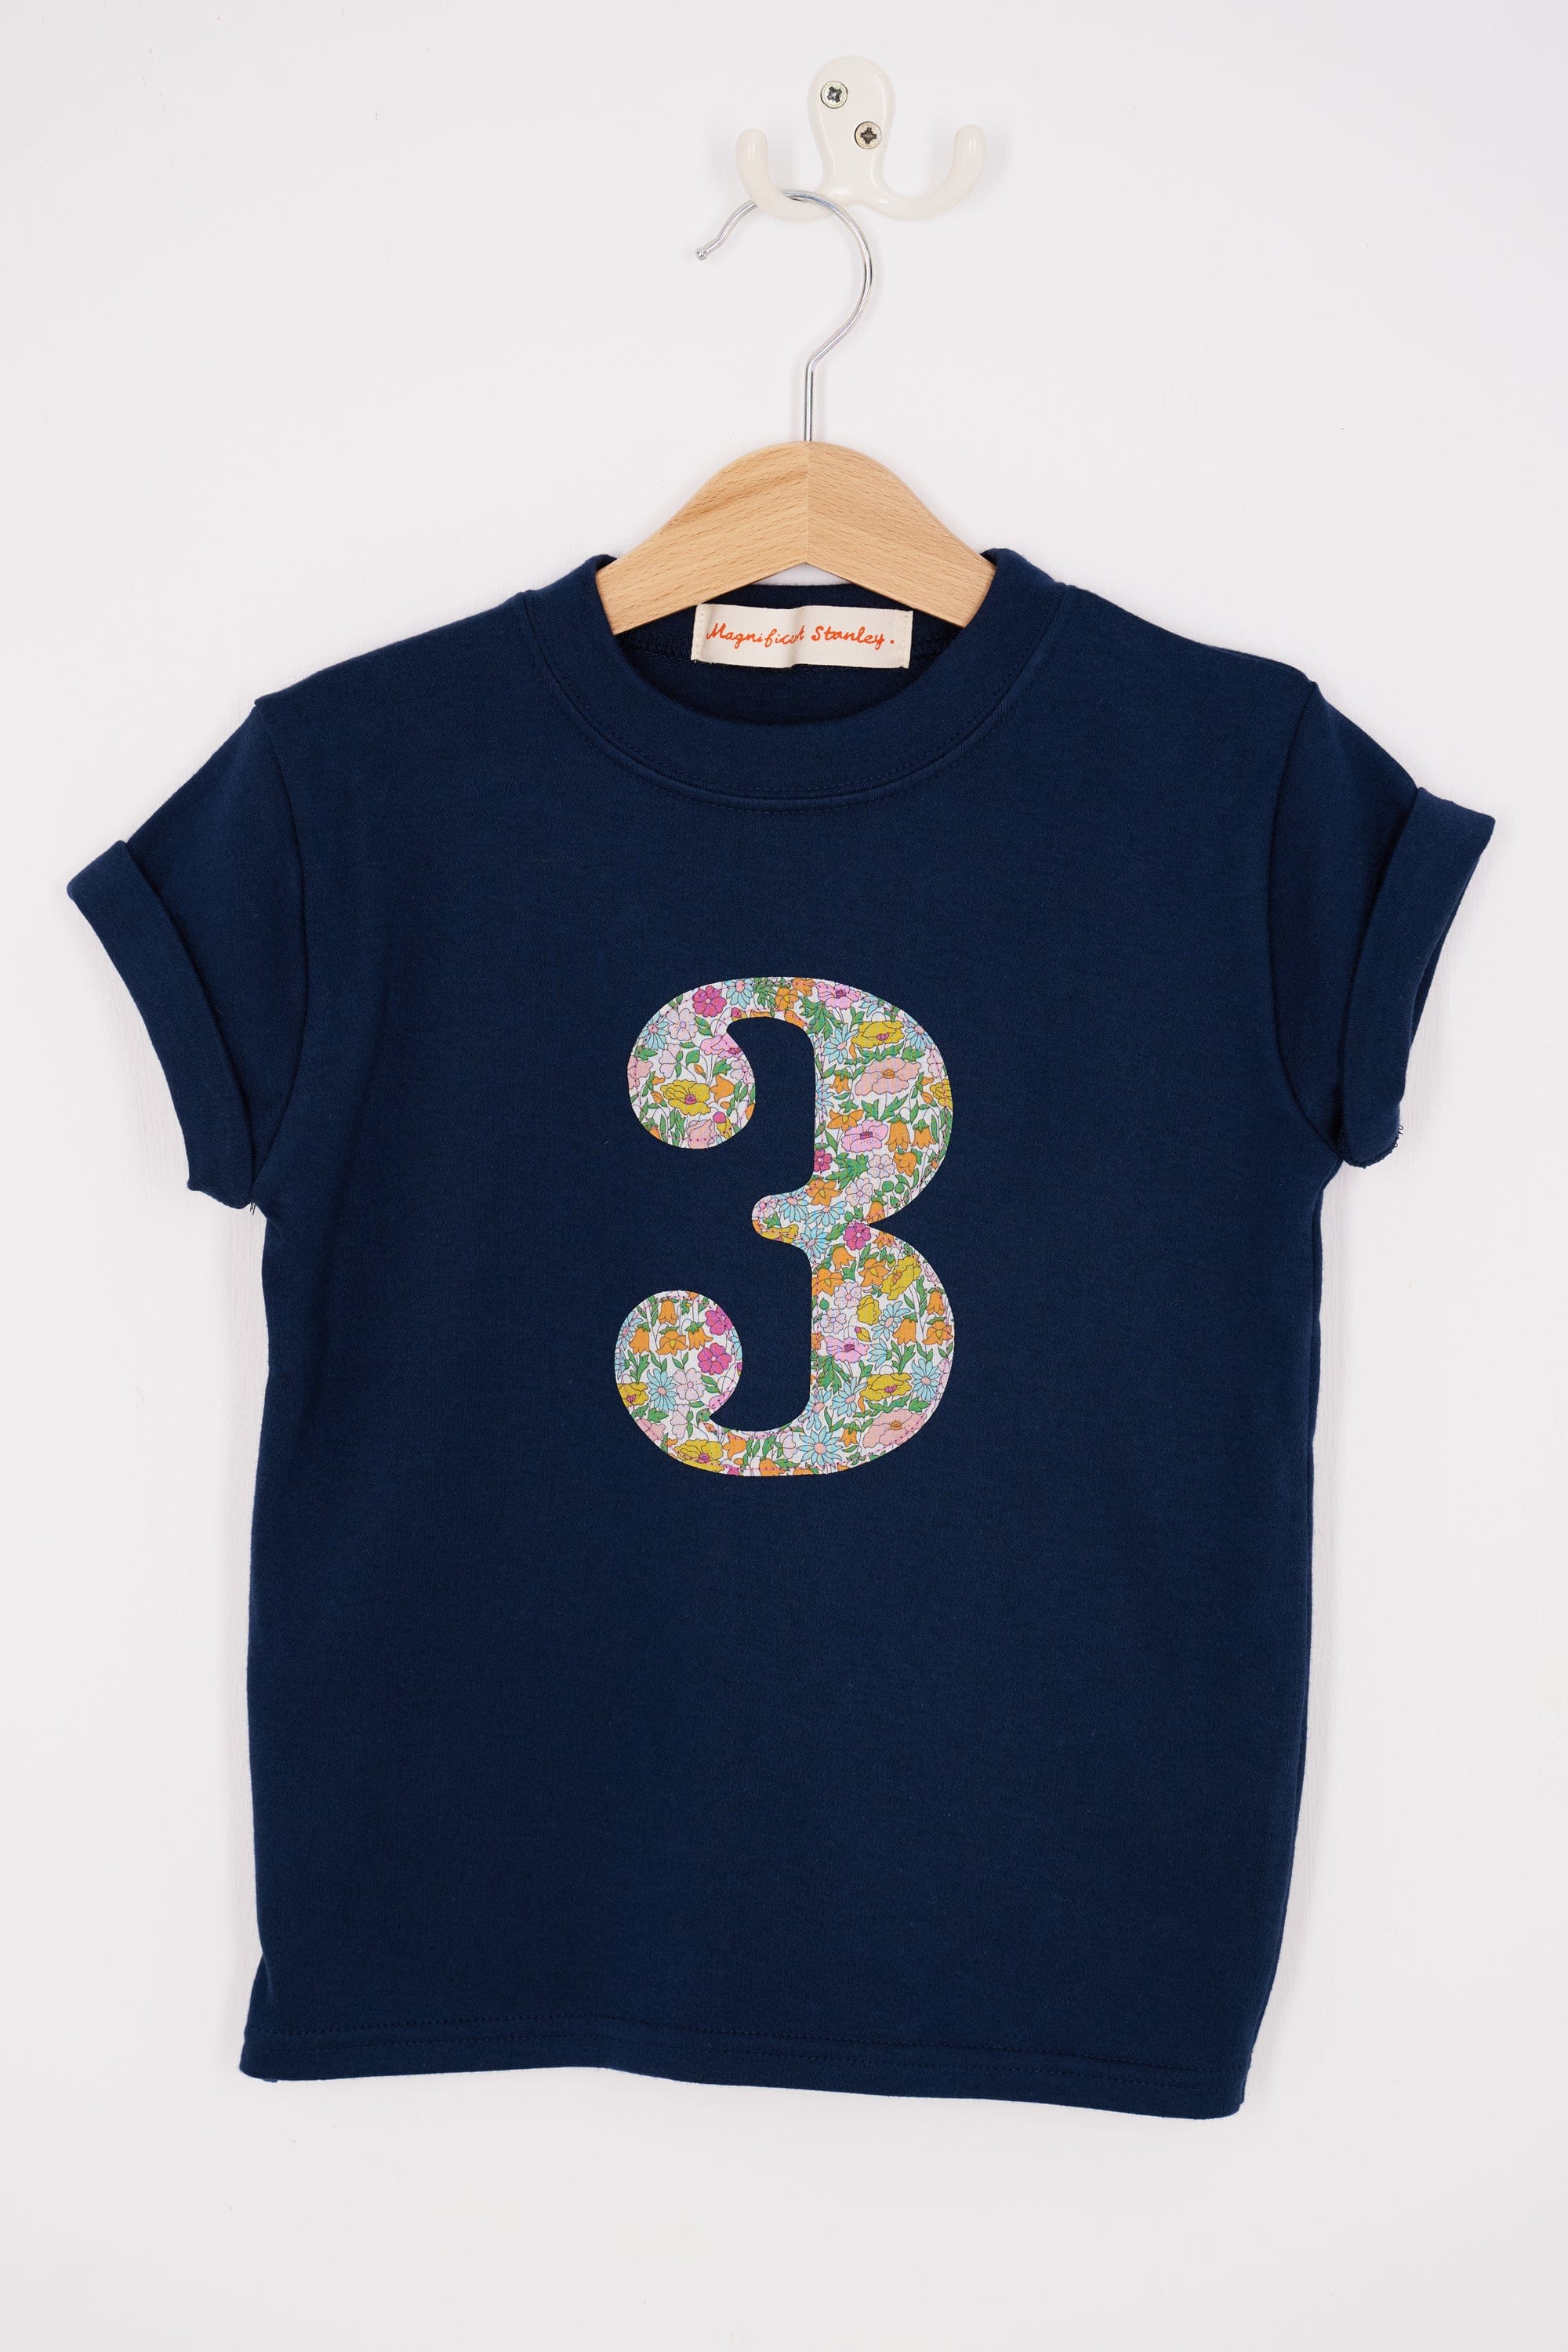 Magnificent Stanley Tee Number Navy T-Shirt in Poppy Forest Liberty Print